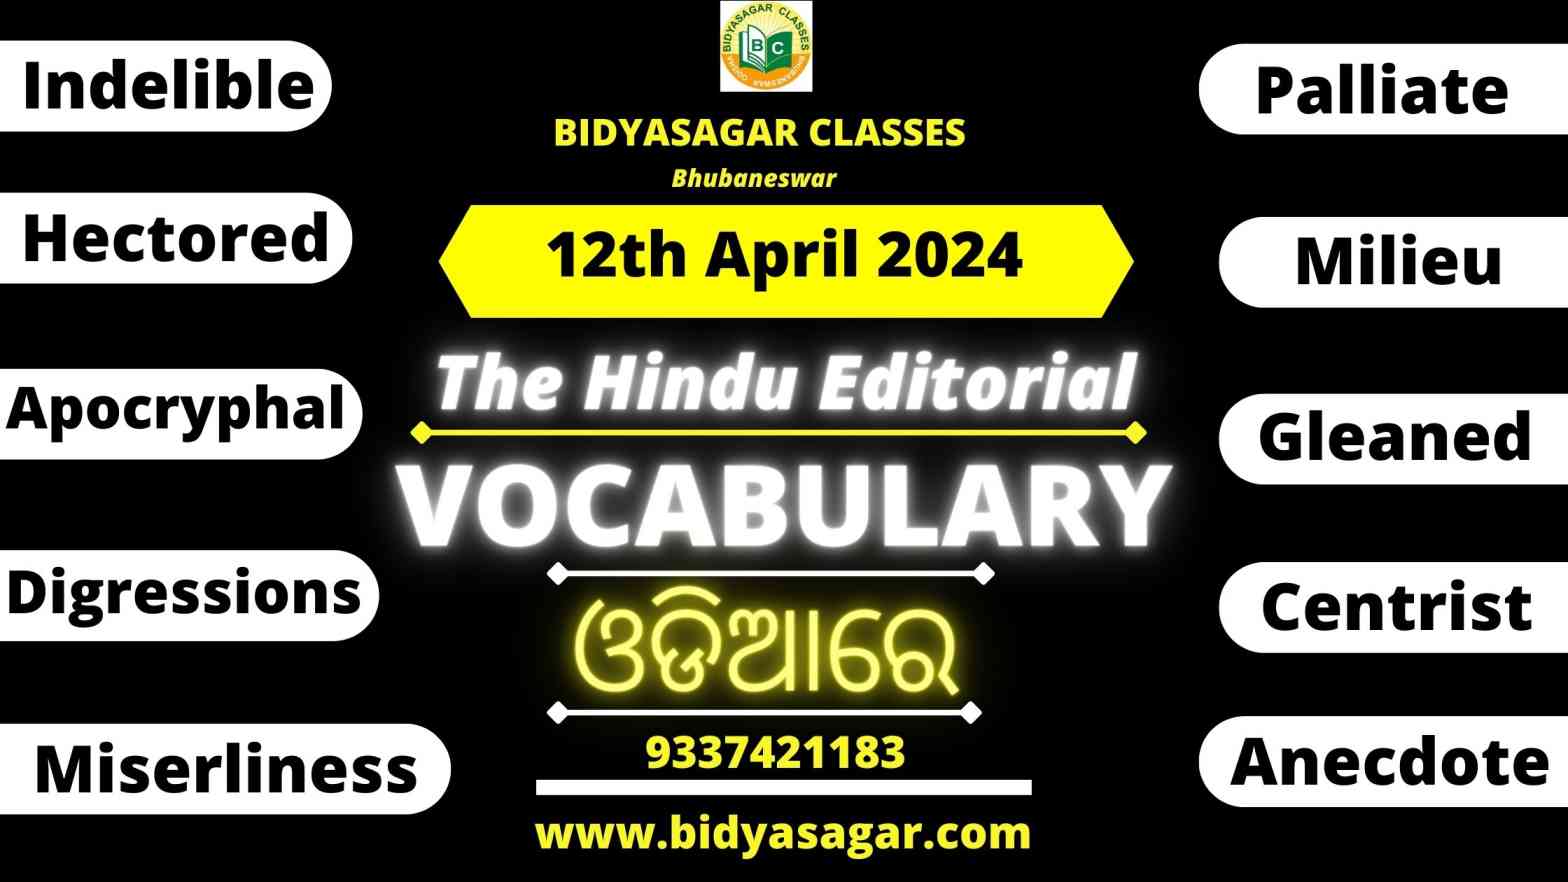 The Hindu Editorial Vocabulary of 12th April 2024